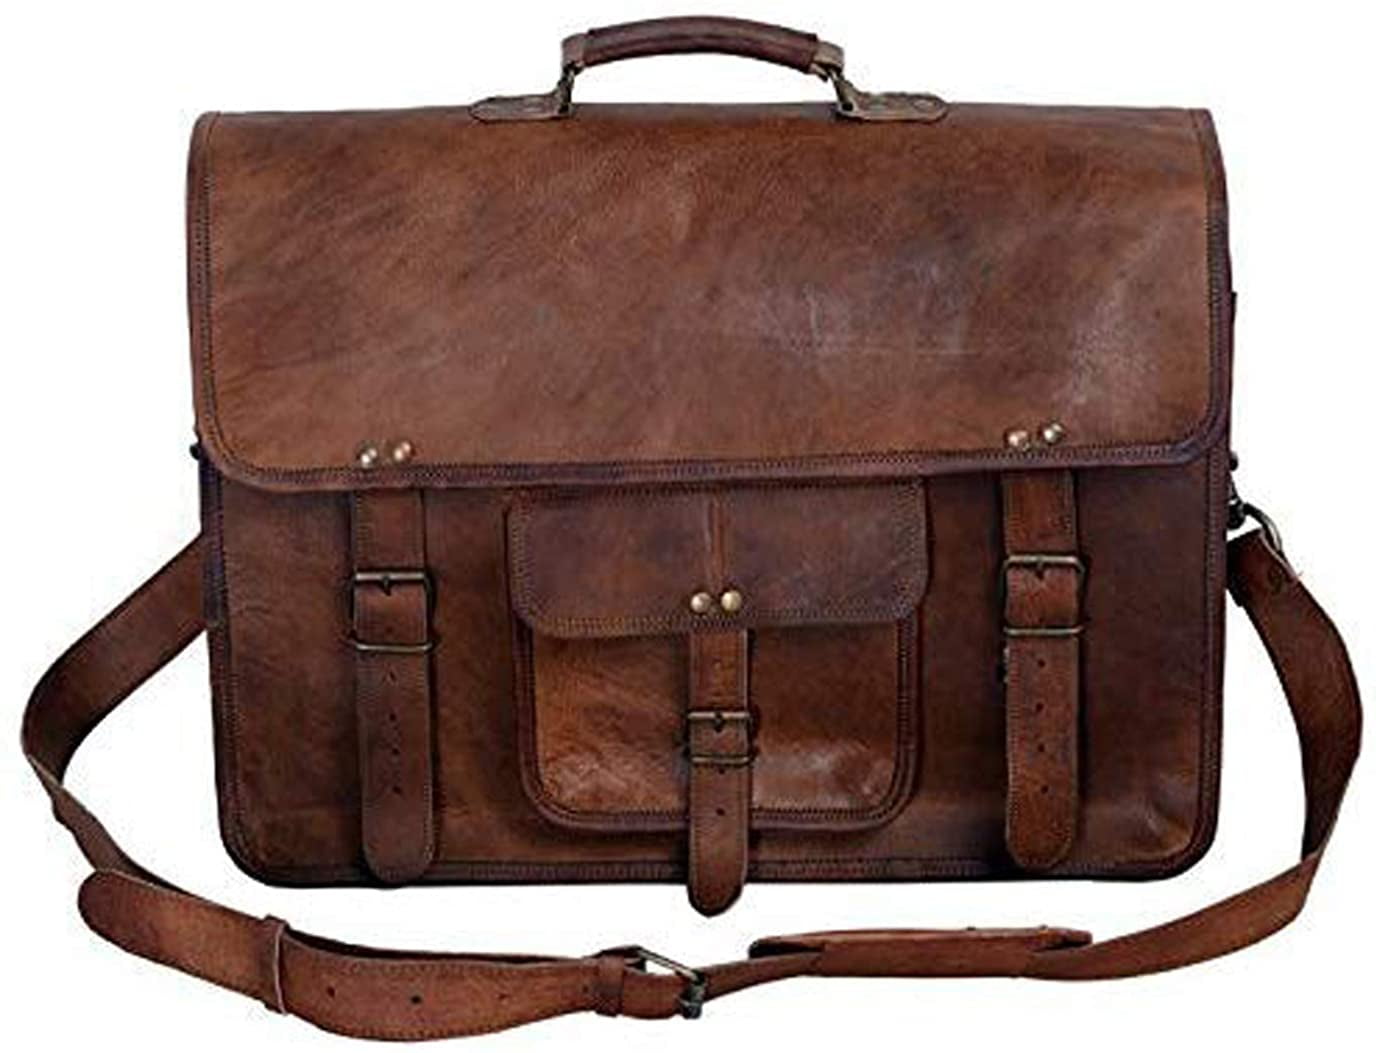 Classic Handcrafted Distressed Brown Leather Bag Small size Messenger Bag A Gift For Men /& Women Shoulder Crossbody For Every day use.